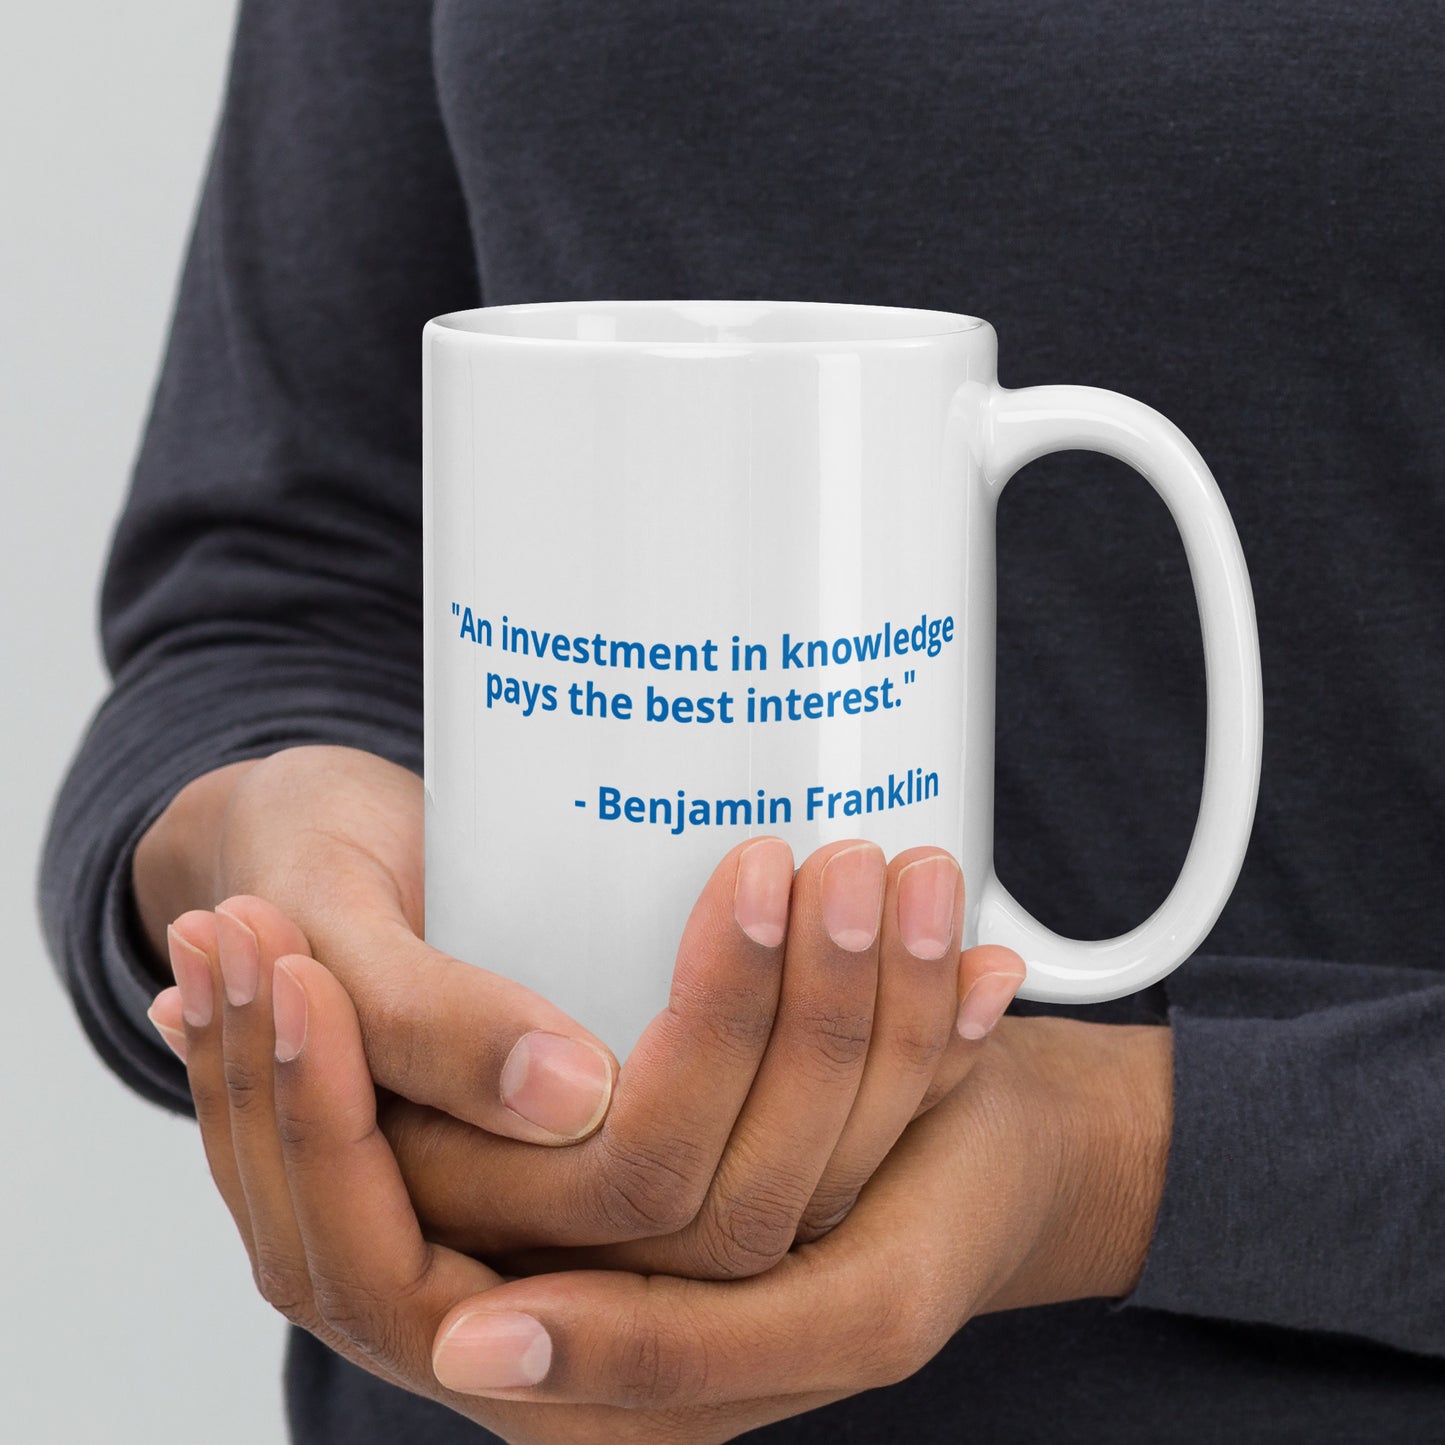 "An investment in knowledge pays the best interest." - Benjamin Franklin - White glossy mug